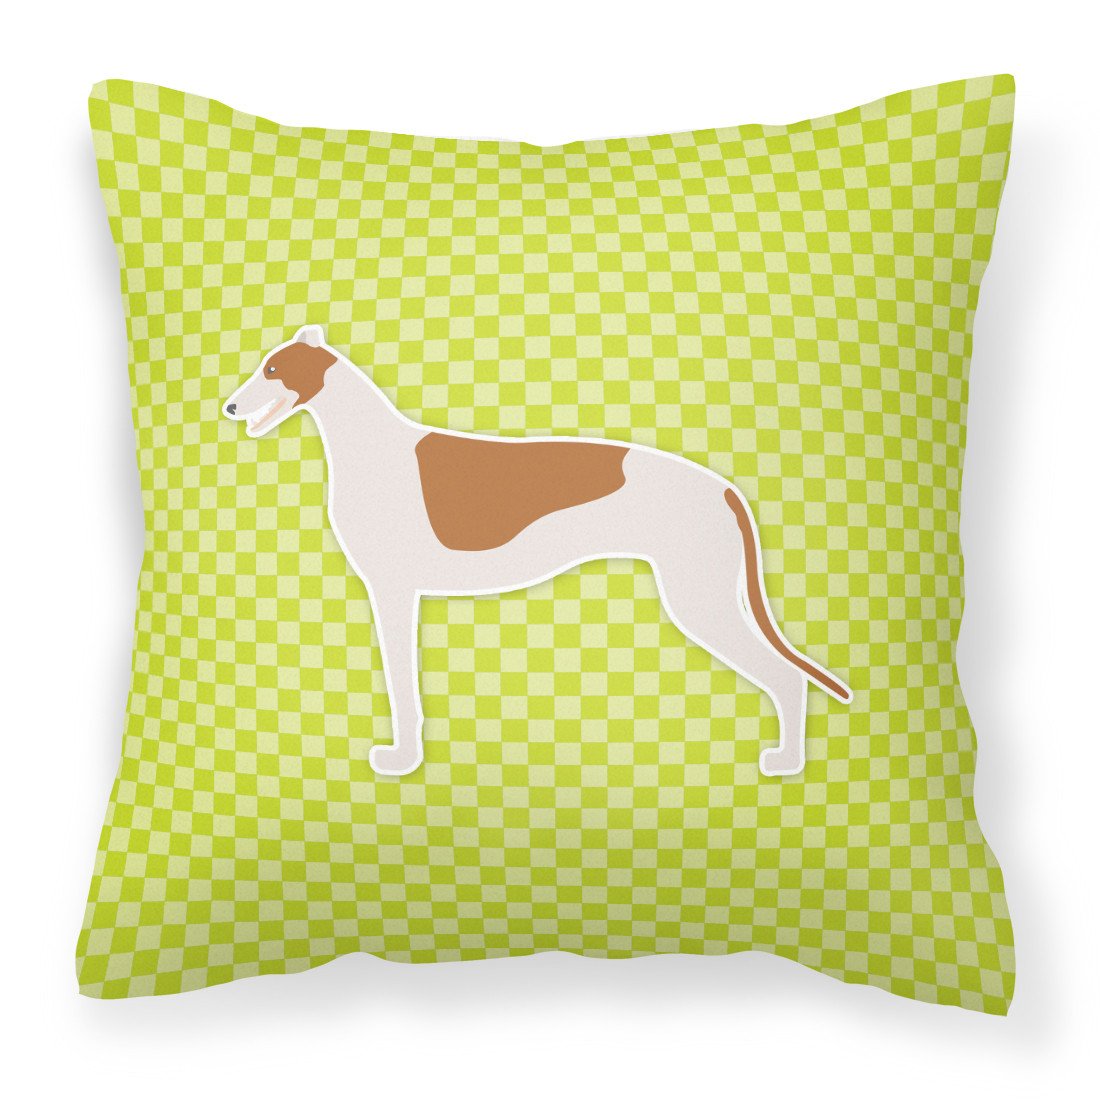 Greyhound Checkerboard Green Fabric Decorative Pillow BB3805PW1818 by Caroline's Treasures